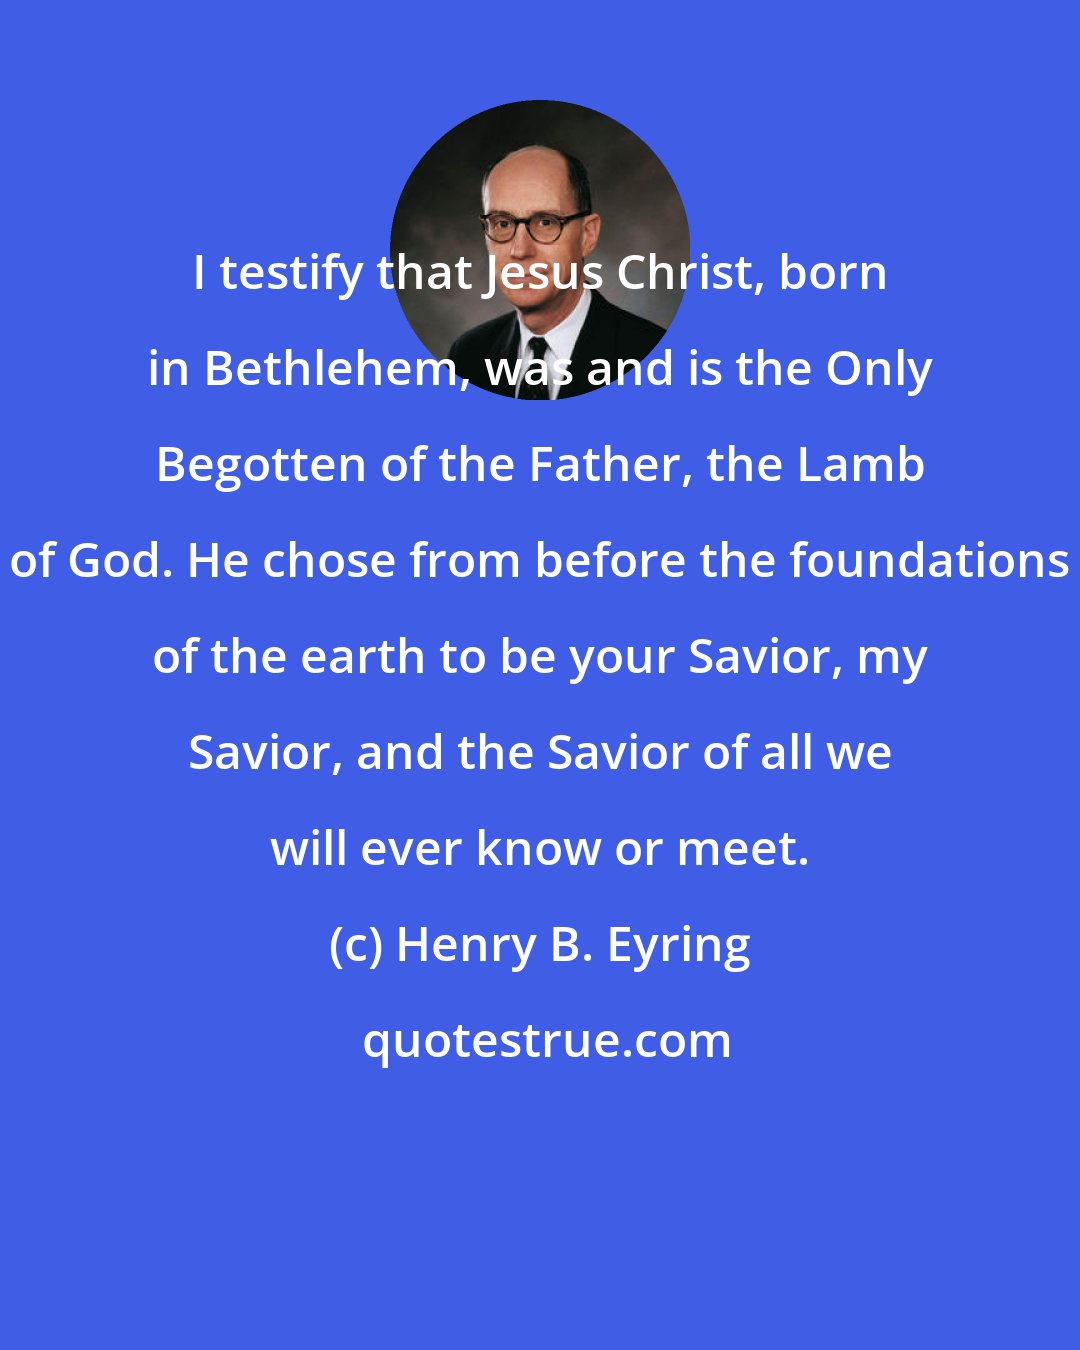 Henry B. Eyring: I testify that Jesus Christ, born in Bethlehem, was and is the Only Begotten of the Father, the Lamb of God. He chose from before the foundations of the earth to be your Savior, my Savior, and the Savior of all we will ever know or meet.